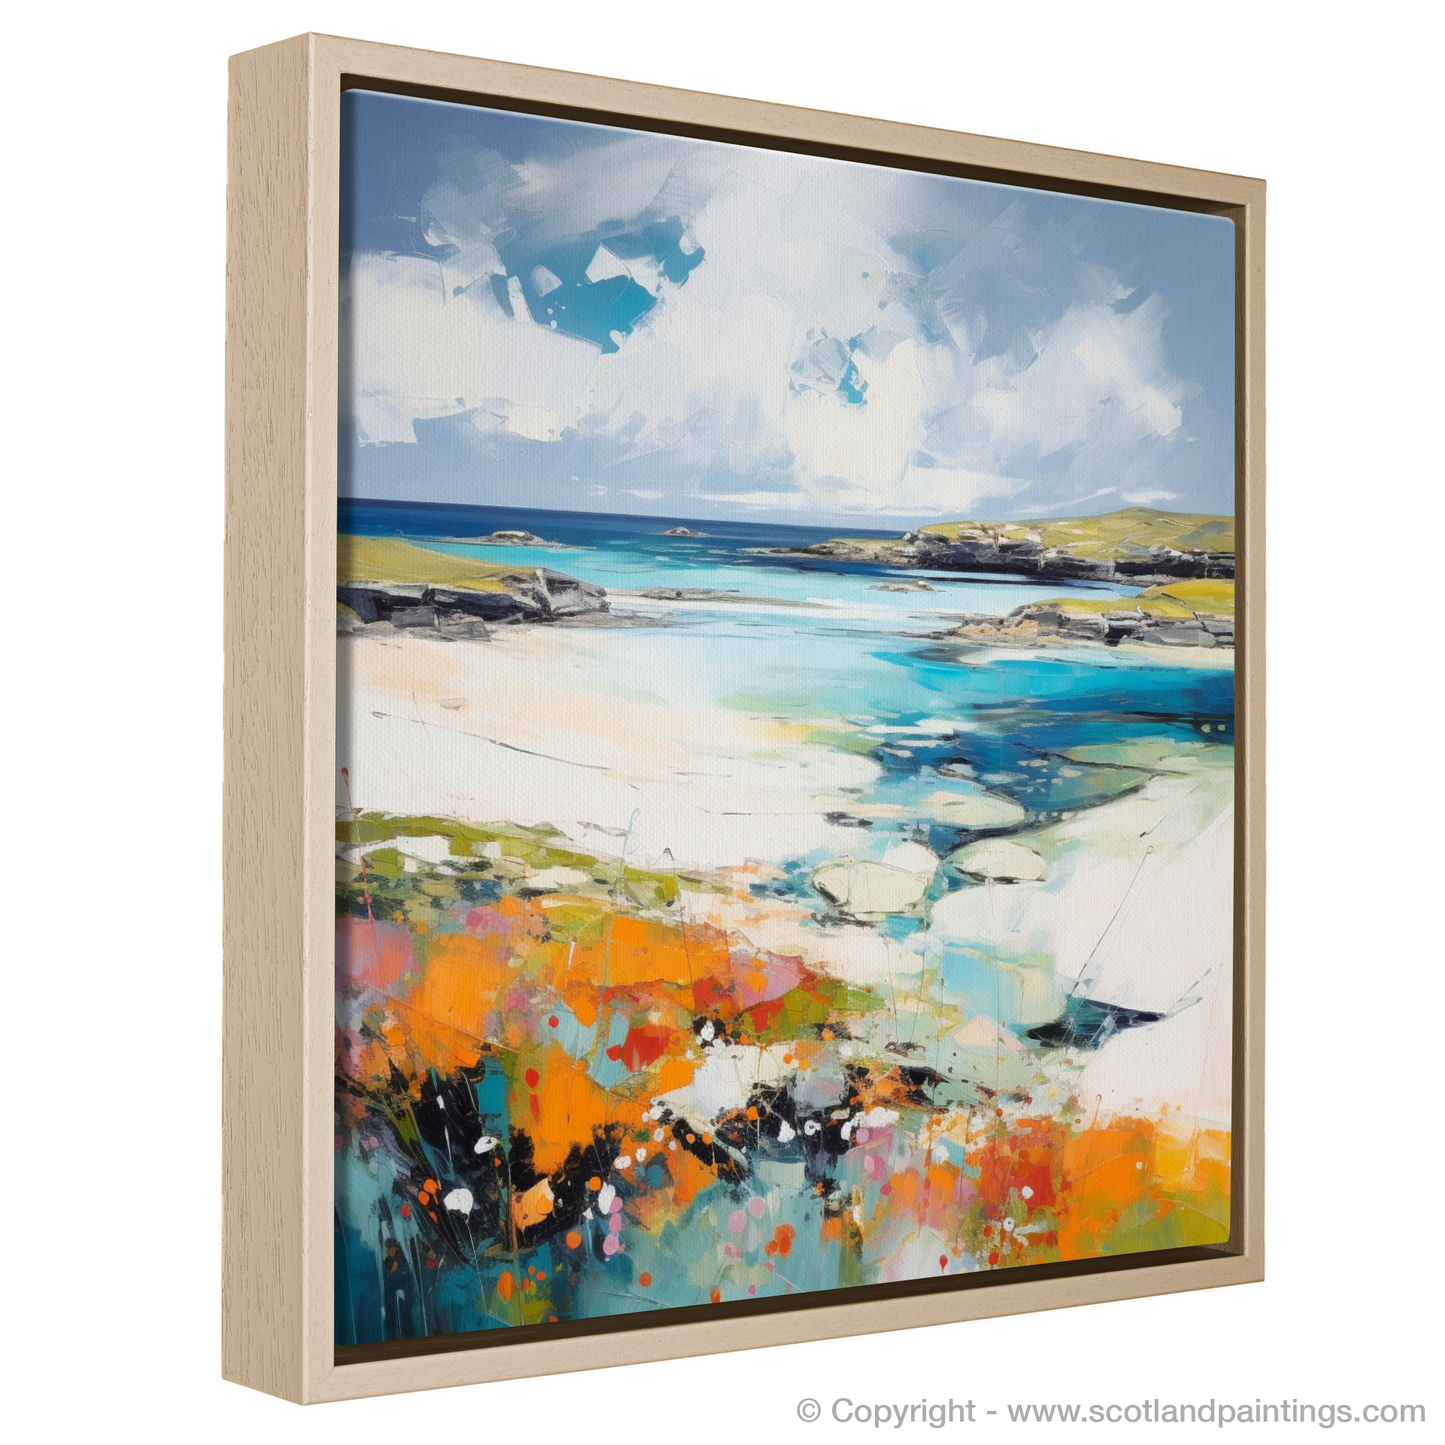 Painting and Art Print of Isle of Barra, Outer Hebrides in summer entitled "Hebridean Summer Essence".